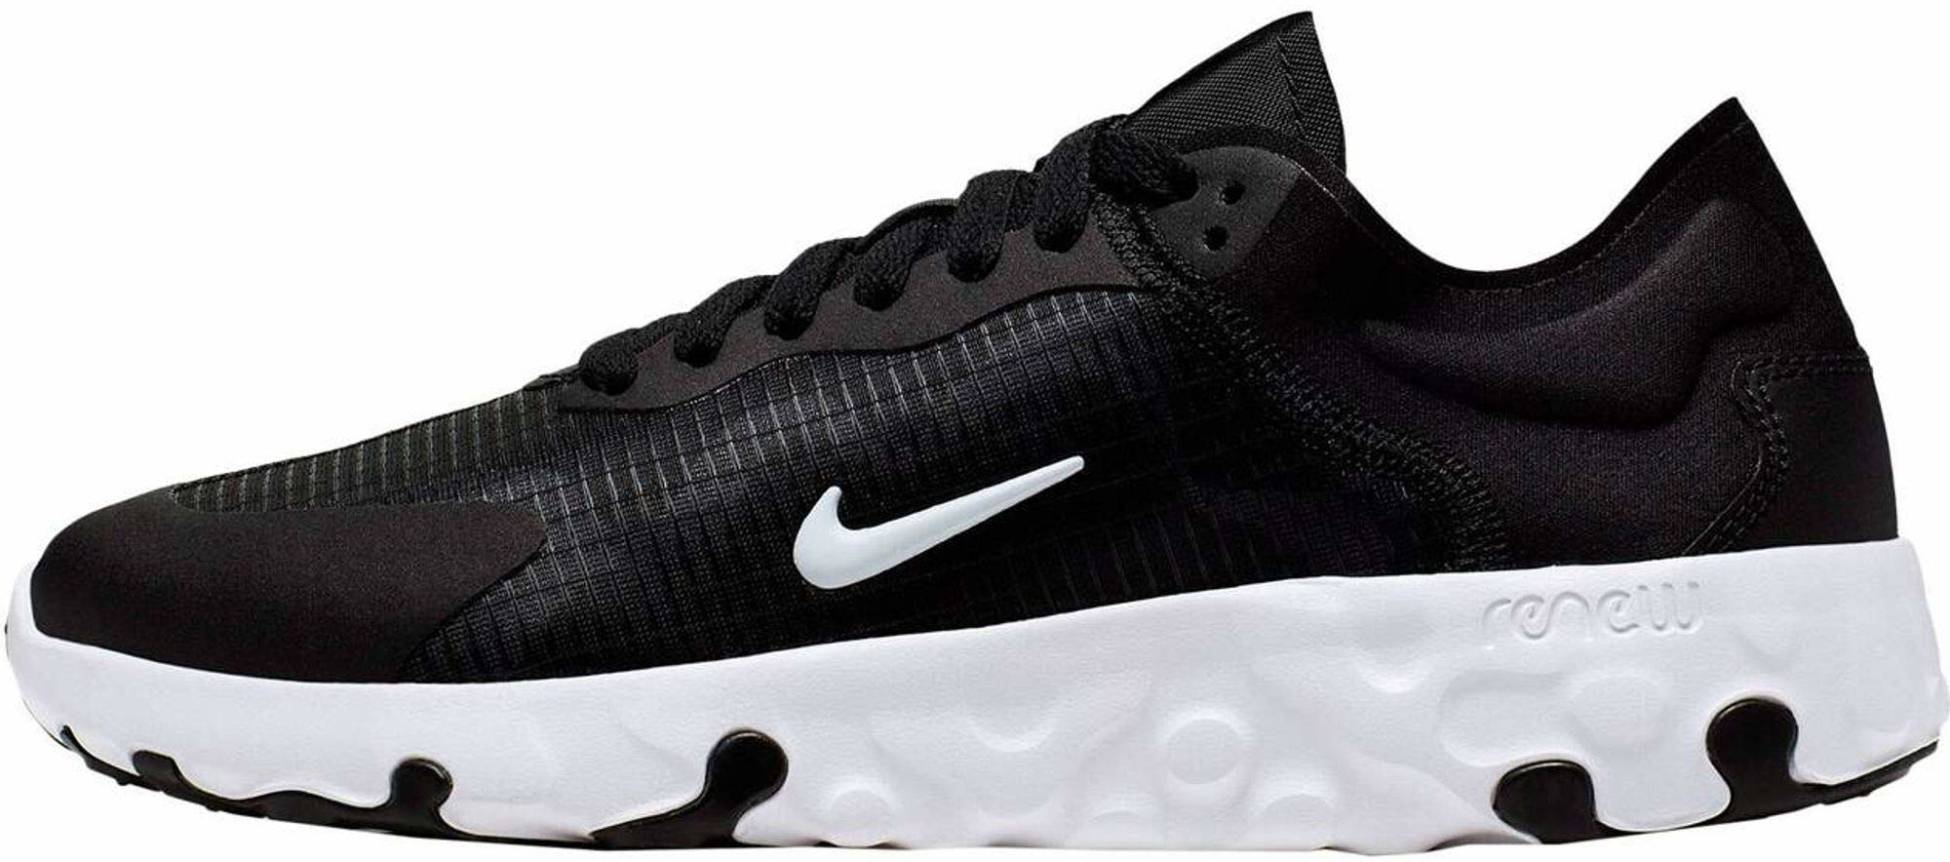 Nike Renew Lucent sneakers in black + 